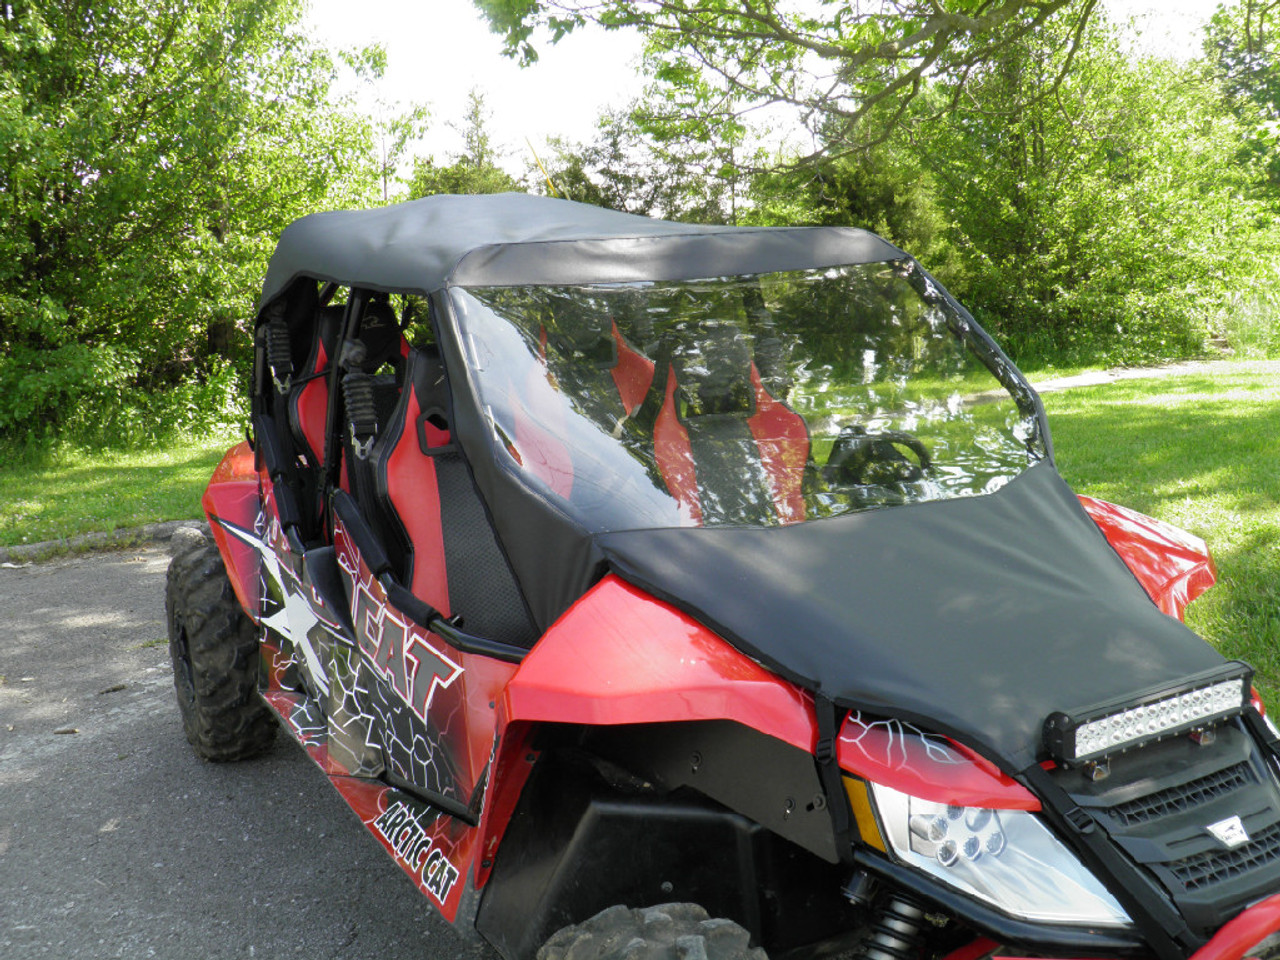 3 Star, side x side, arctic cat, wildcat 4, full cab enclosure with vinyl windshield front angle view